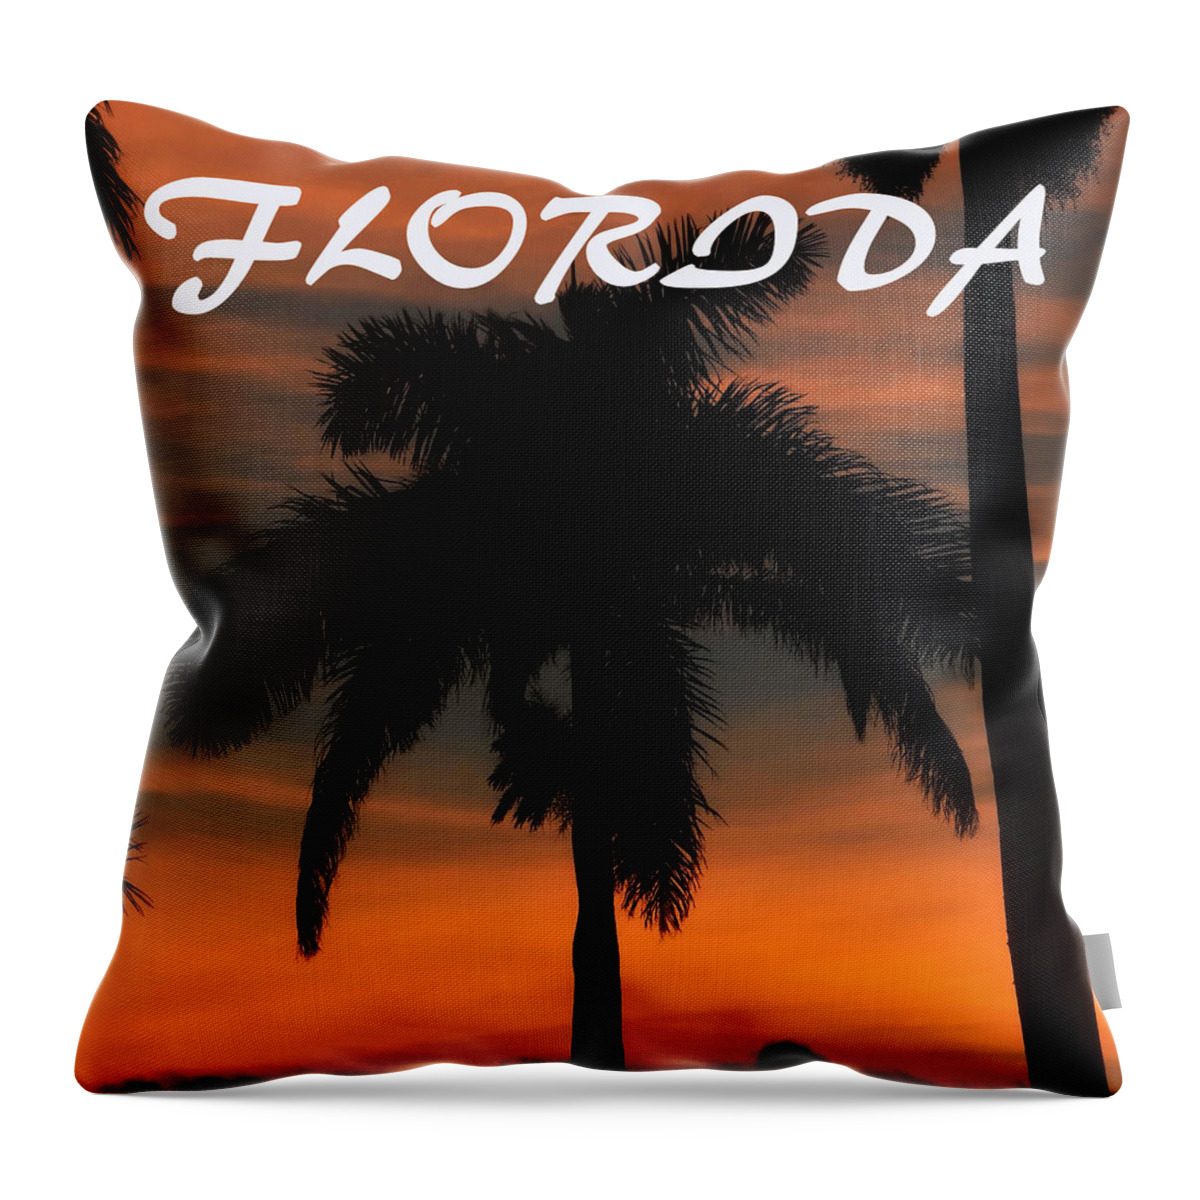 Florida Throw Pillow featuring the photograph Florida State royal palm 1 by David Lee Thompson